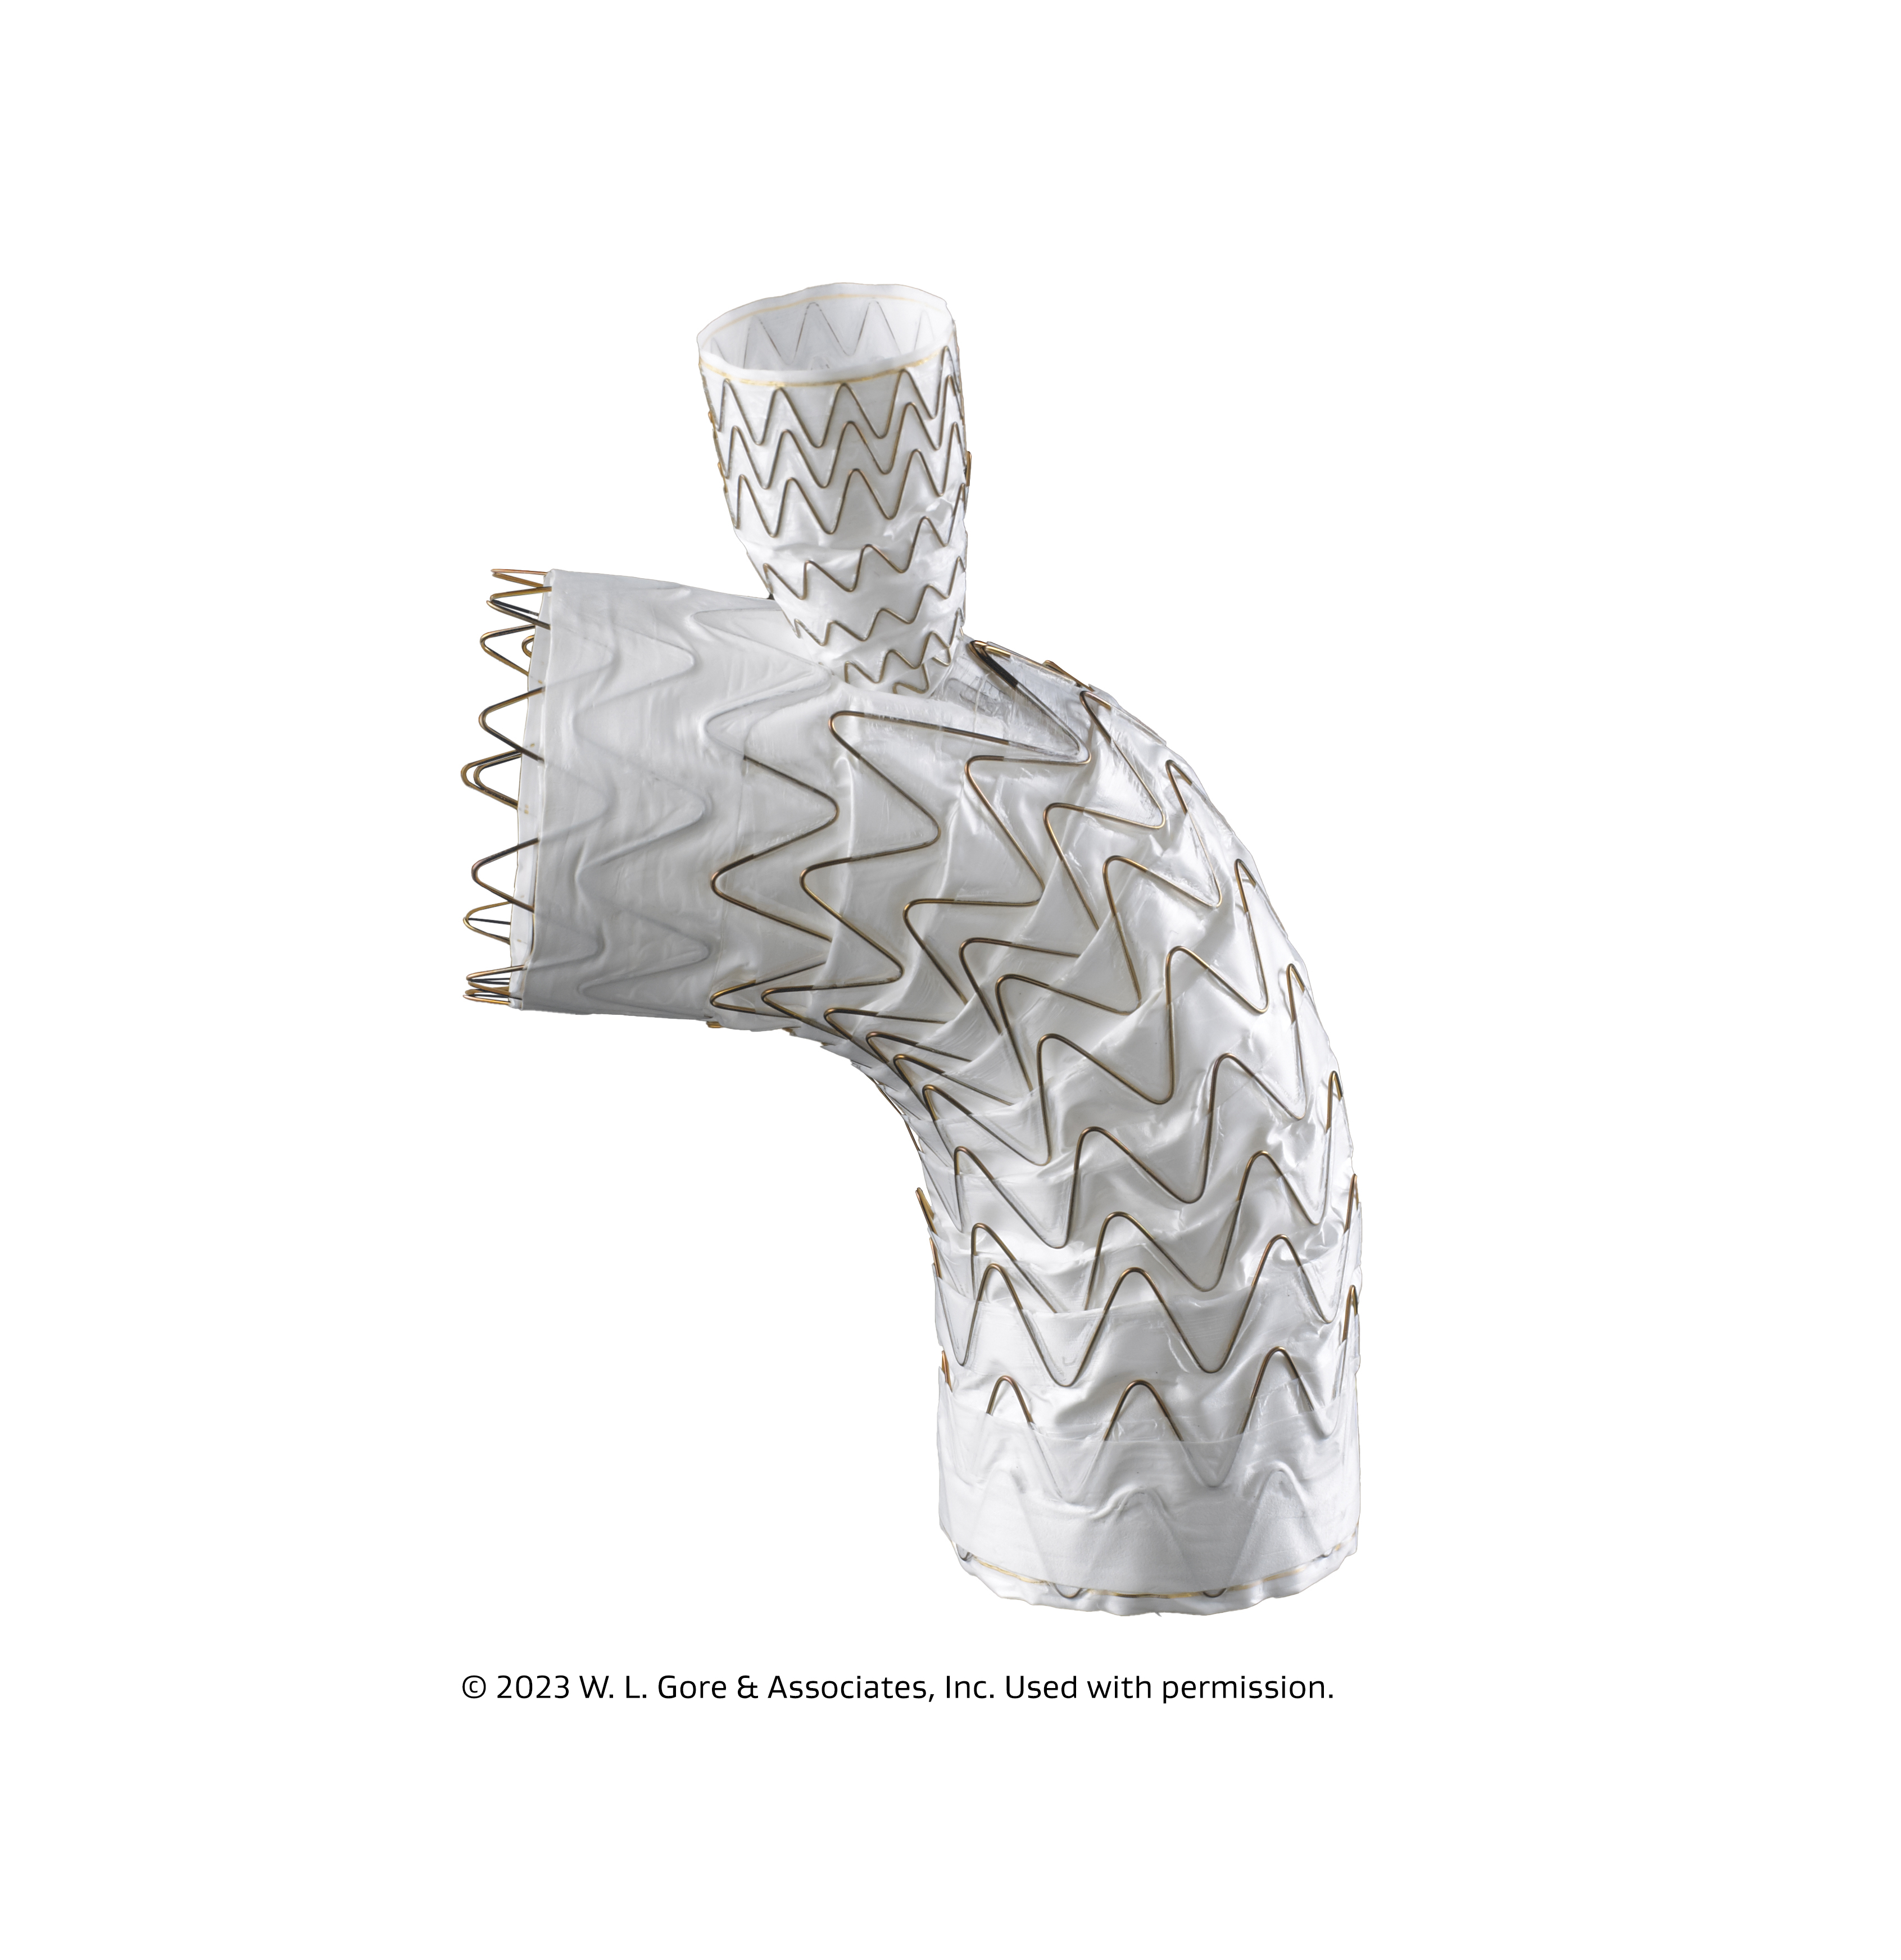 GORE® TAG® Conformable Thoracic Stent Graft with ACTIVE CONTROL